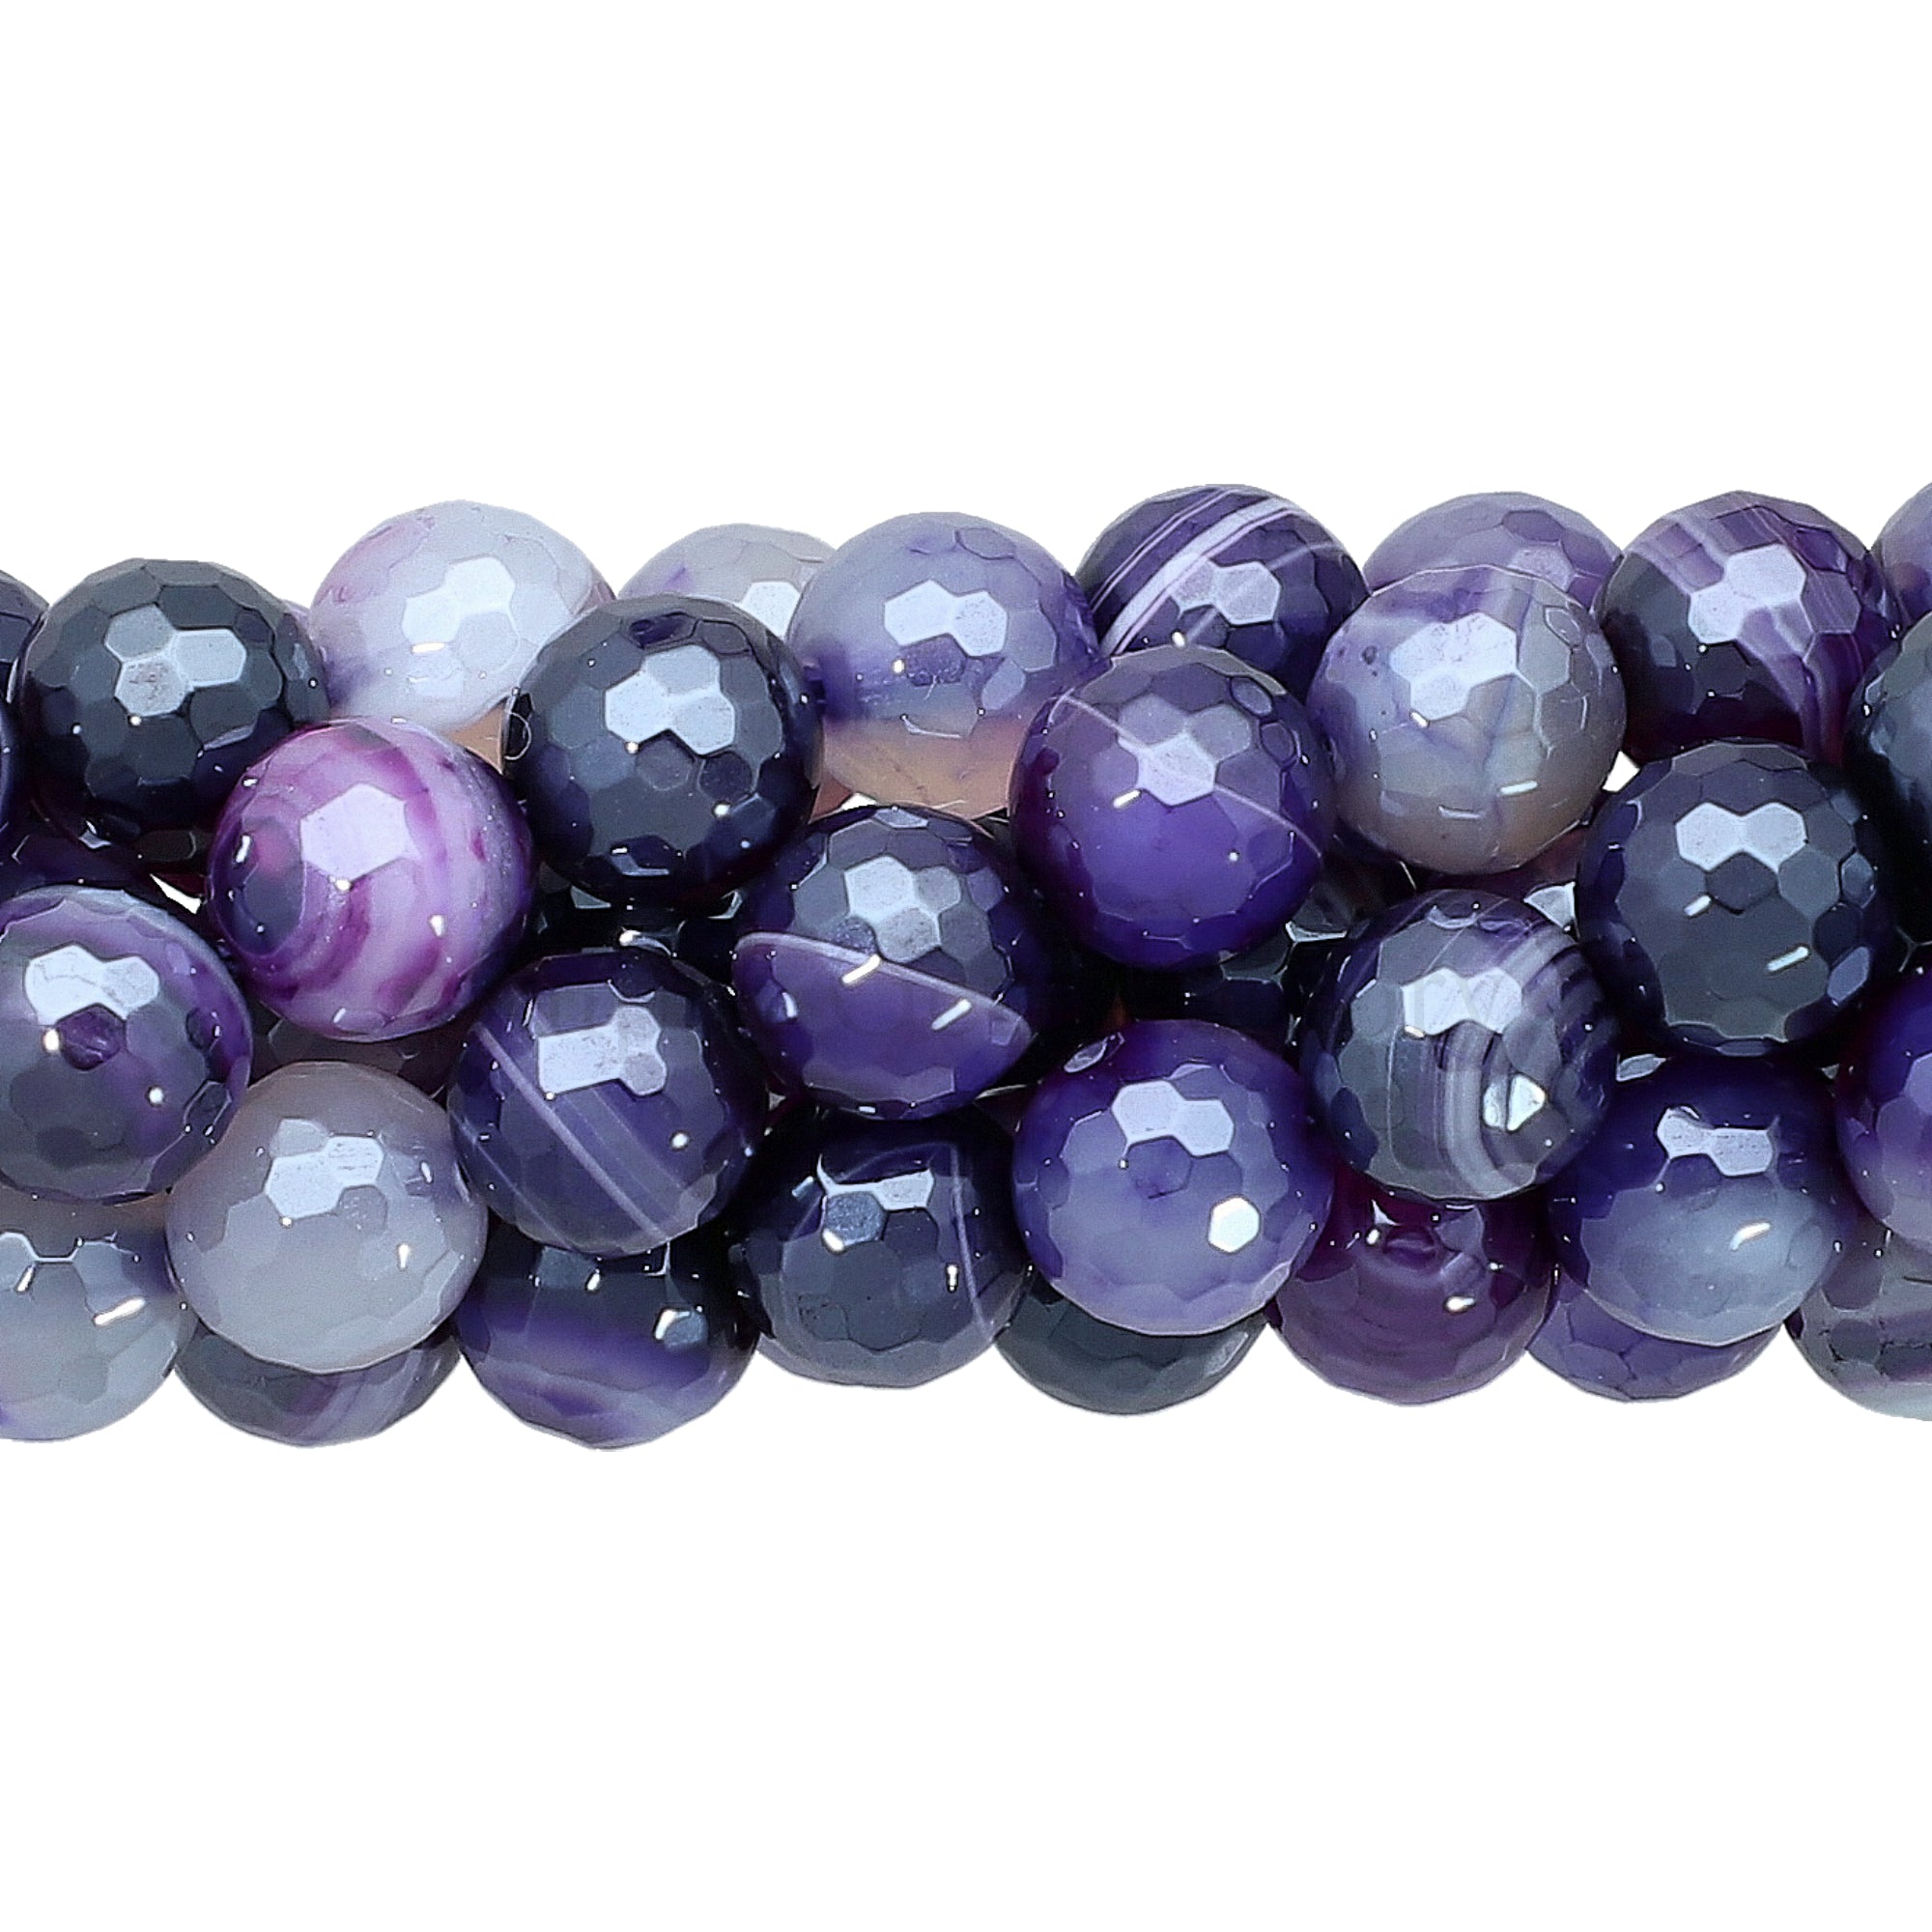 8 MM Mystic Coated Agate Faceted Round Beads 14 Inches Strand